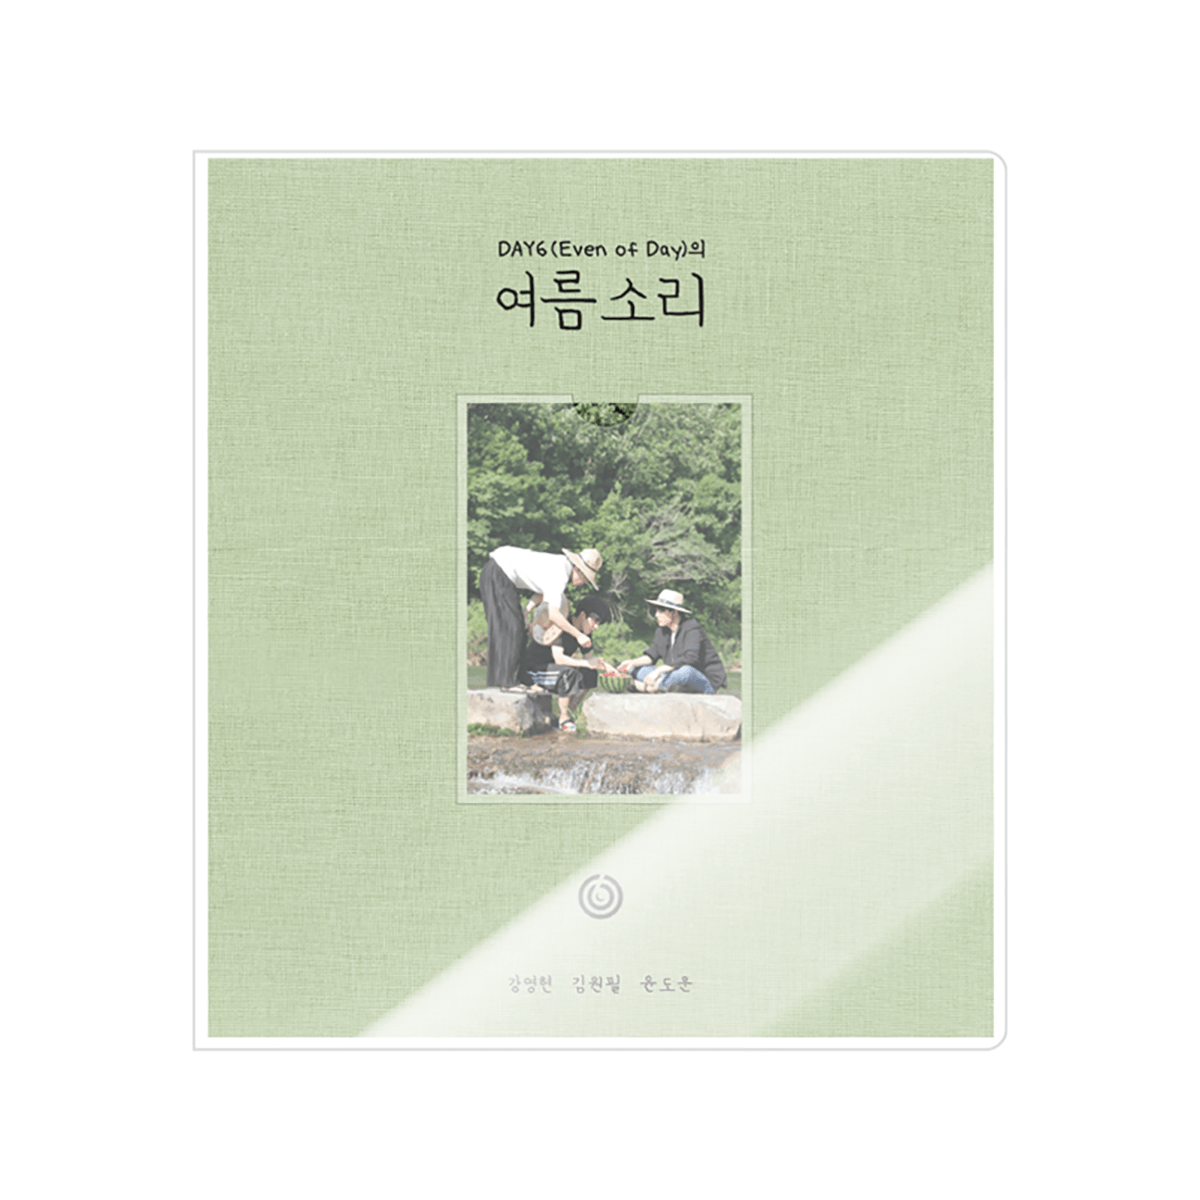 DAY6 (EVEN OF DAY) 'SUMMER MELODY' PHOTO BOOK COVER